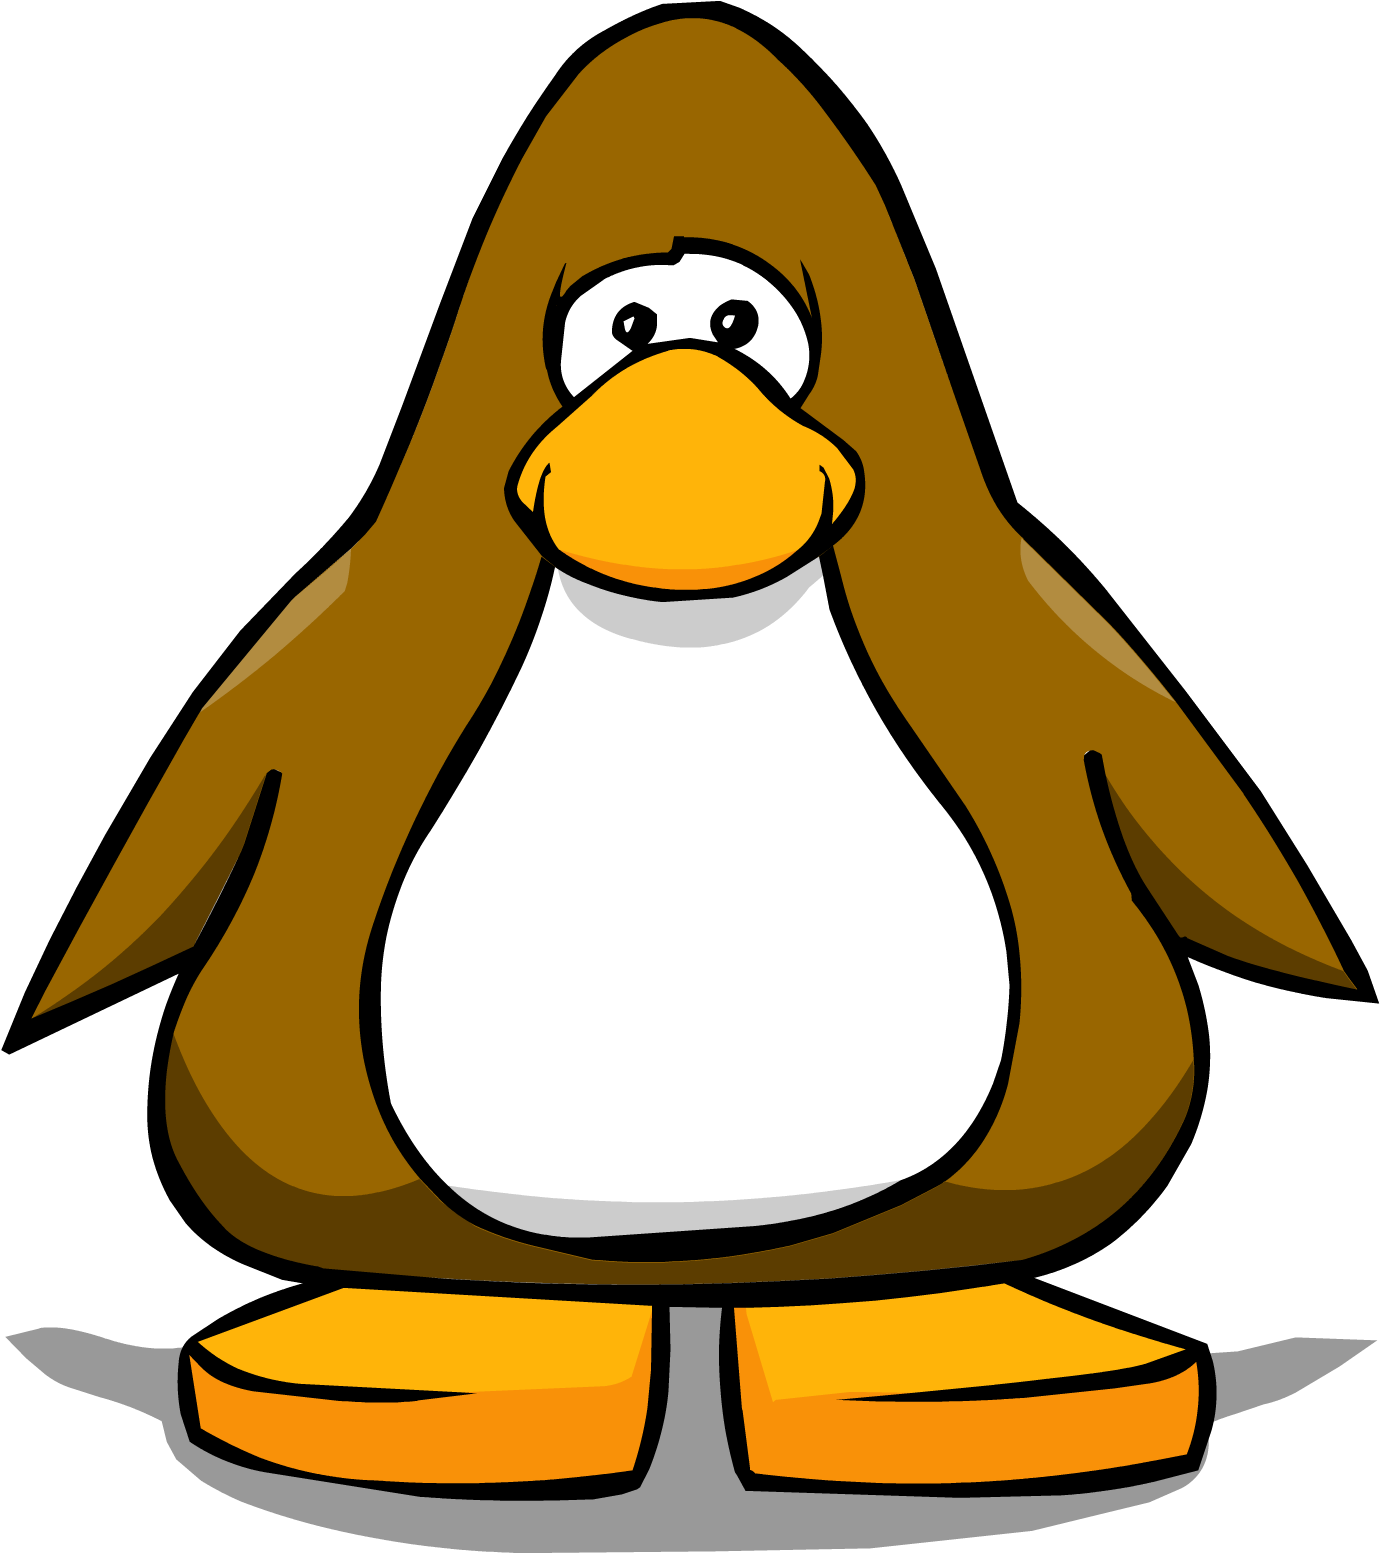 More From My Site - Club Penguin Ninja Mask (1386x1561)